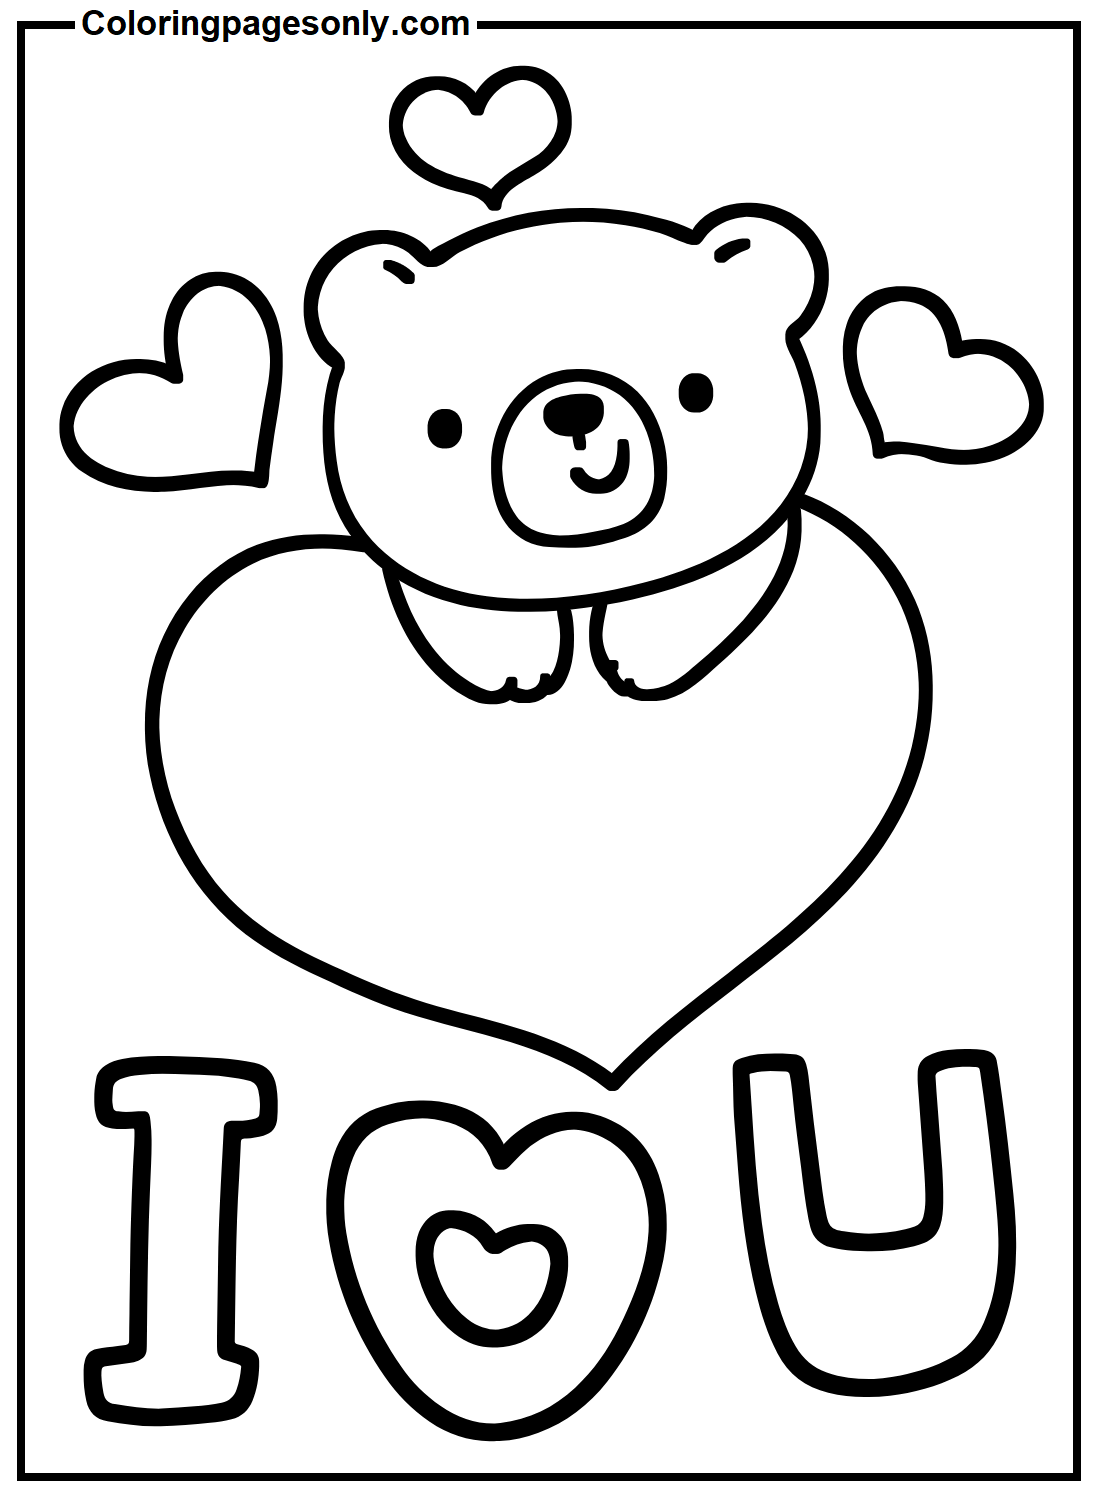 Bear with Heart Valentine’s Day Coloring Page